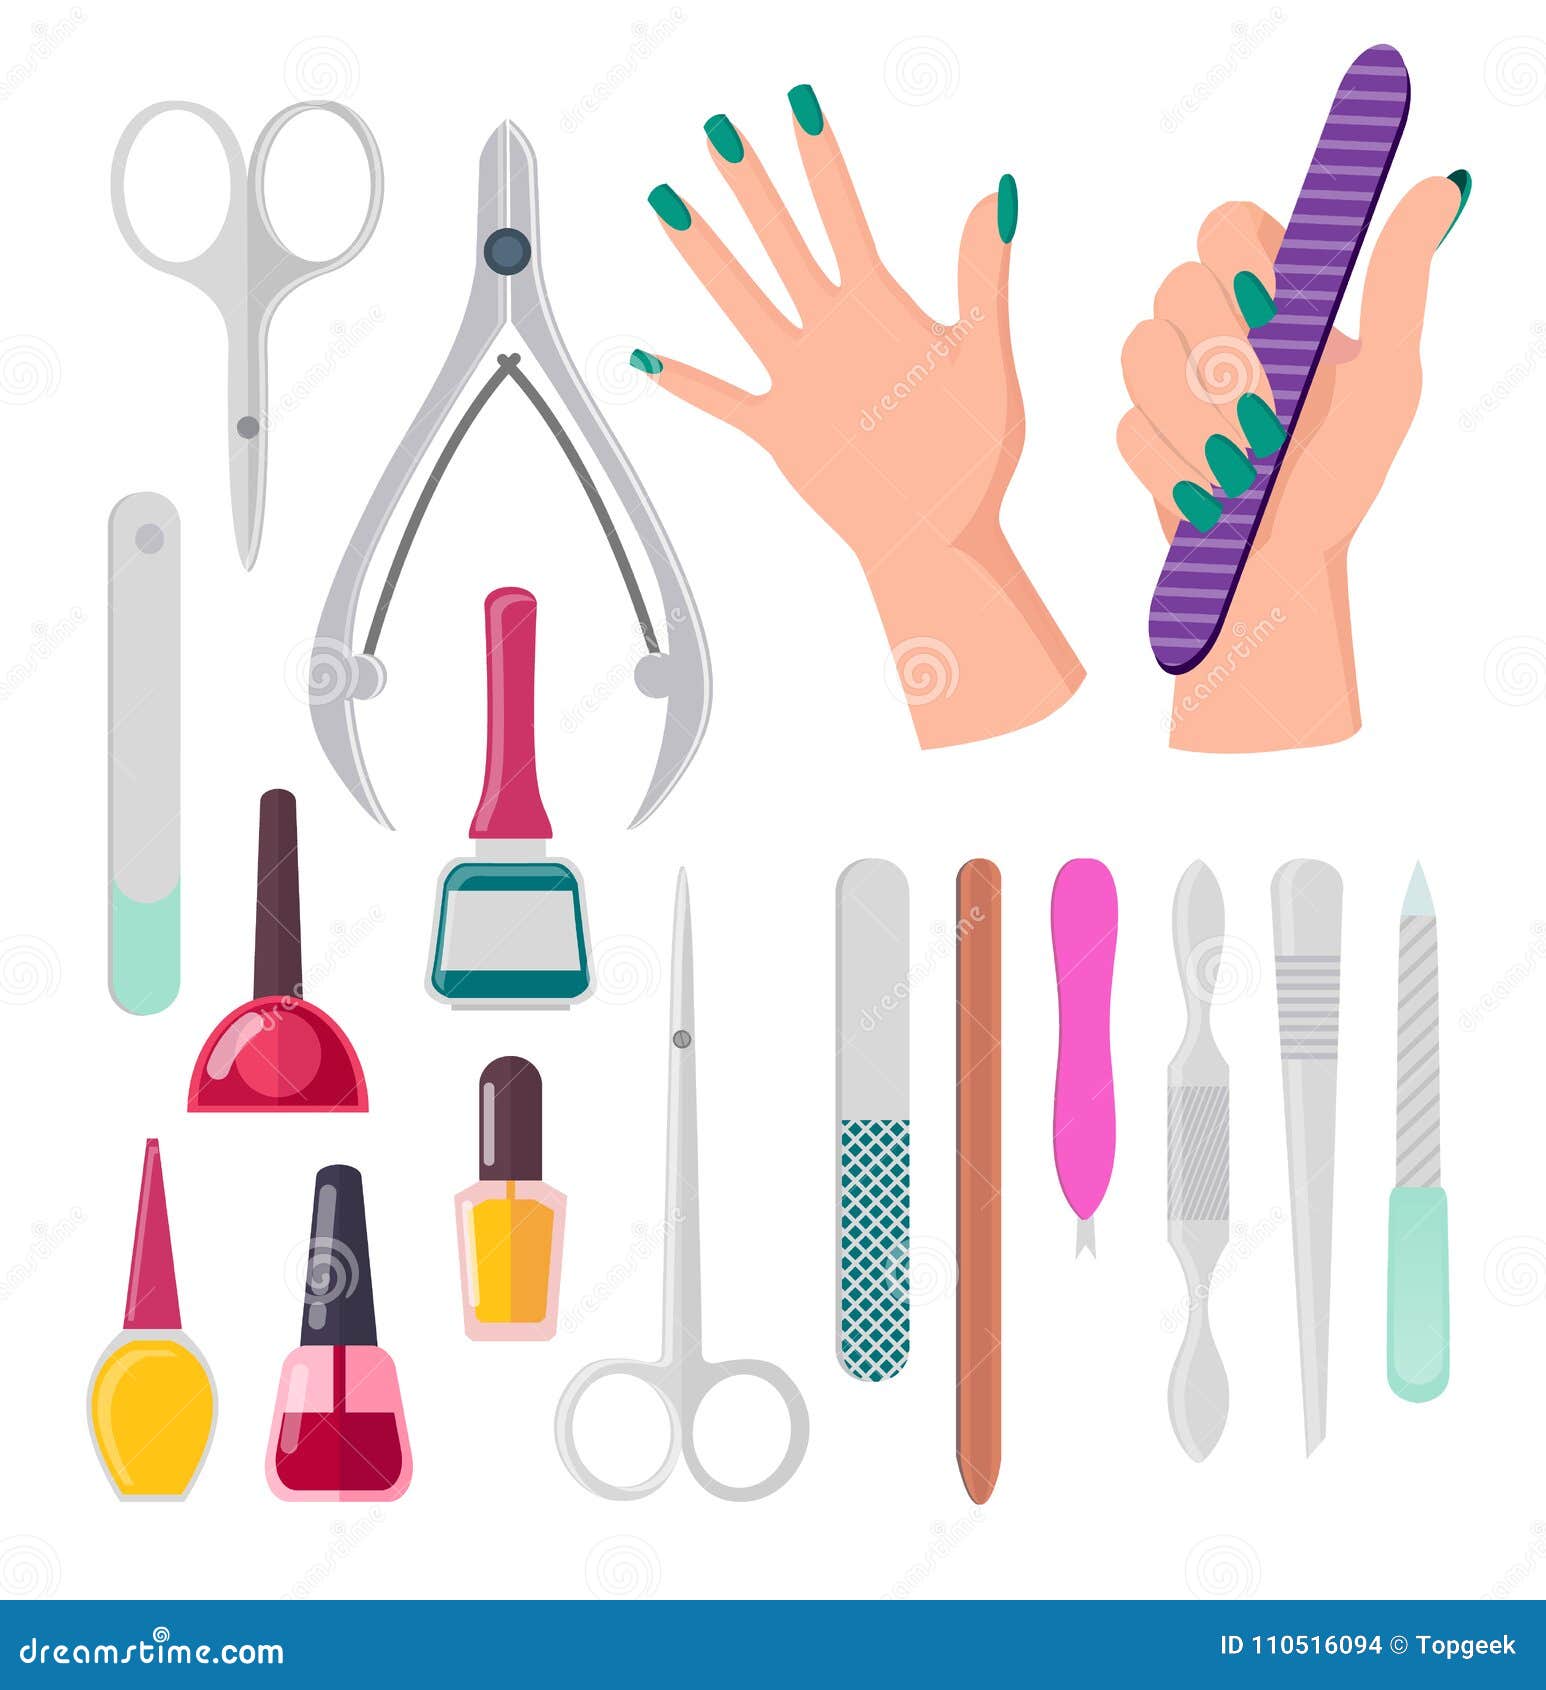 Hands and Manicure Instruments Vector Illustration Stock Vector ...